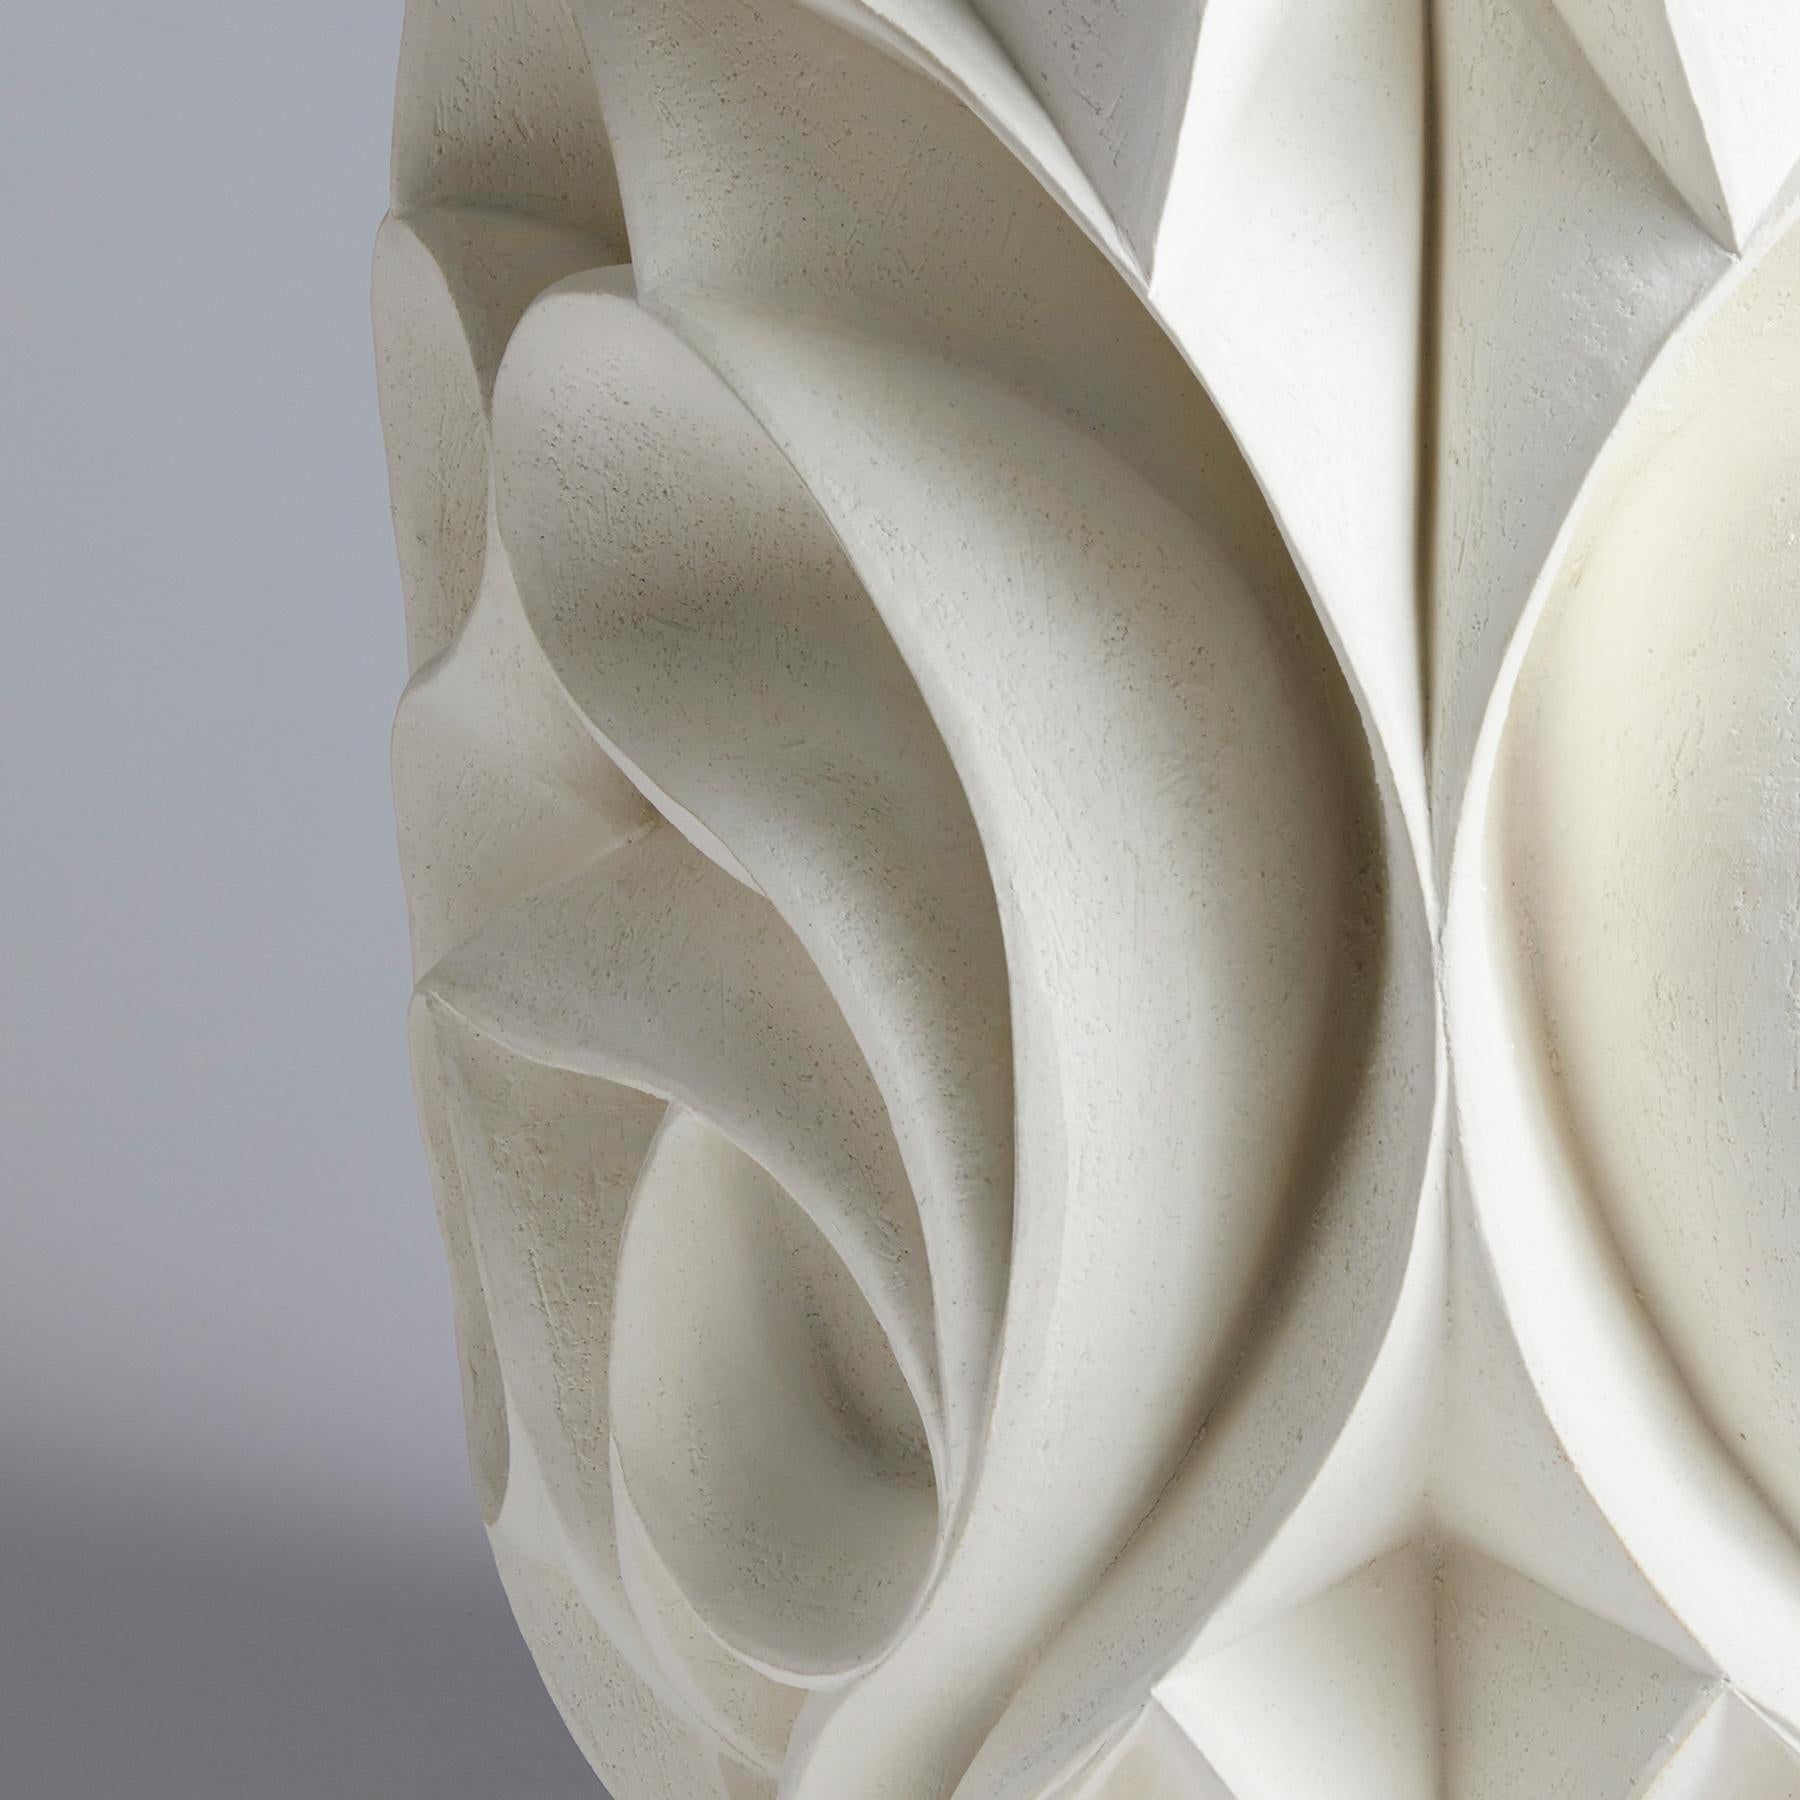 British Contemporary Hand Carved Ceramic Sculpture by Halima Cassell